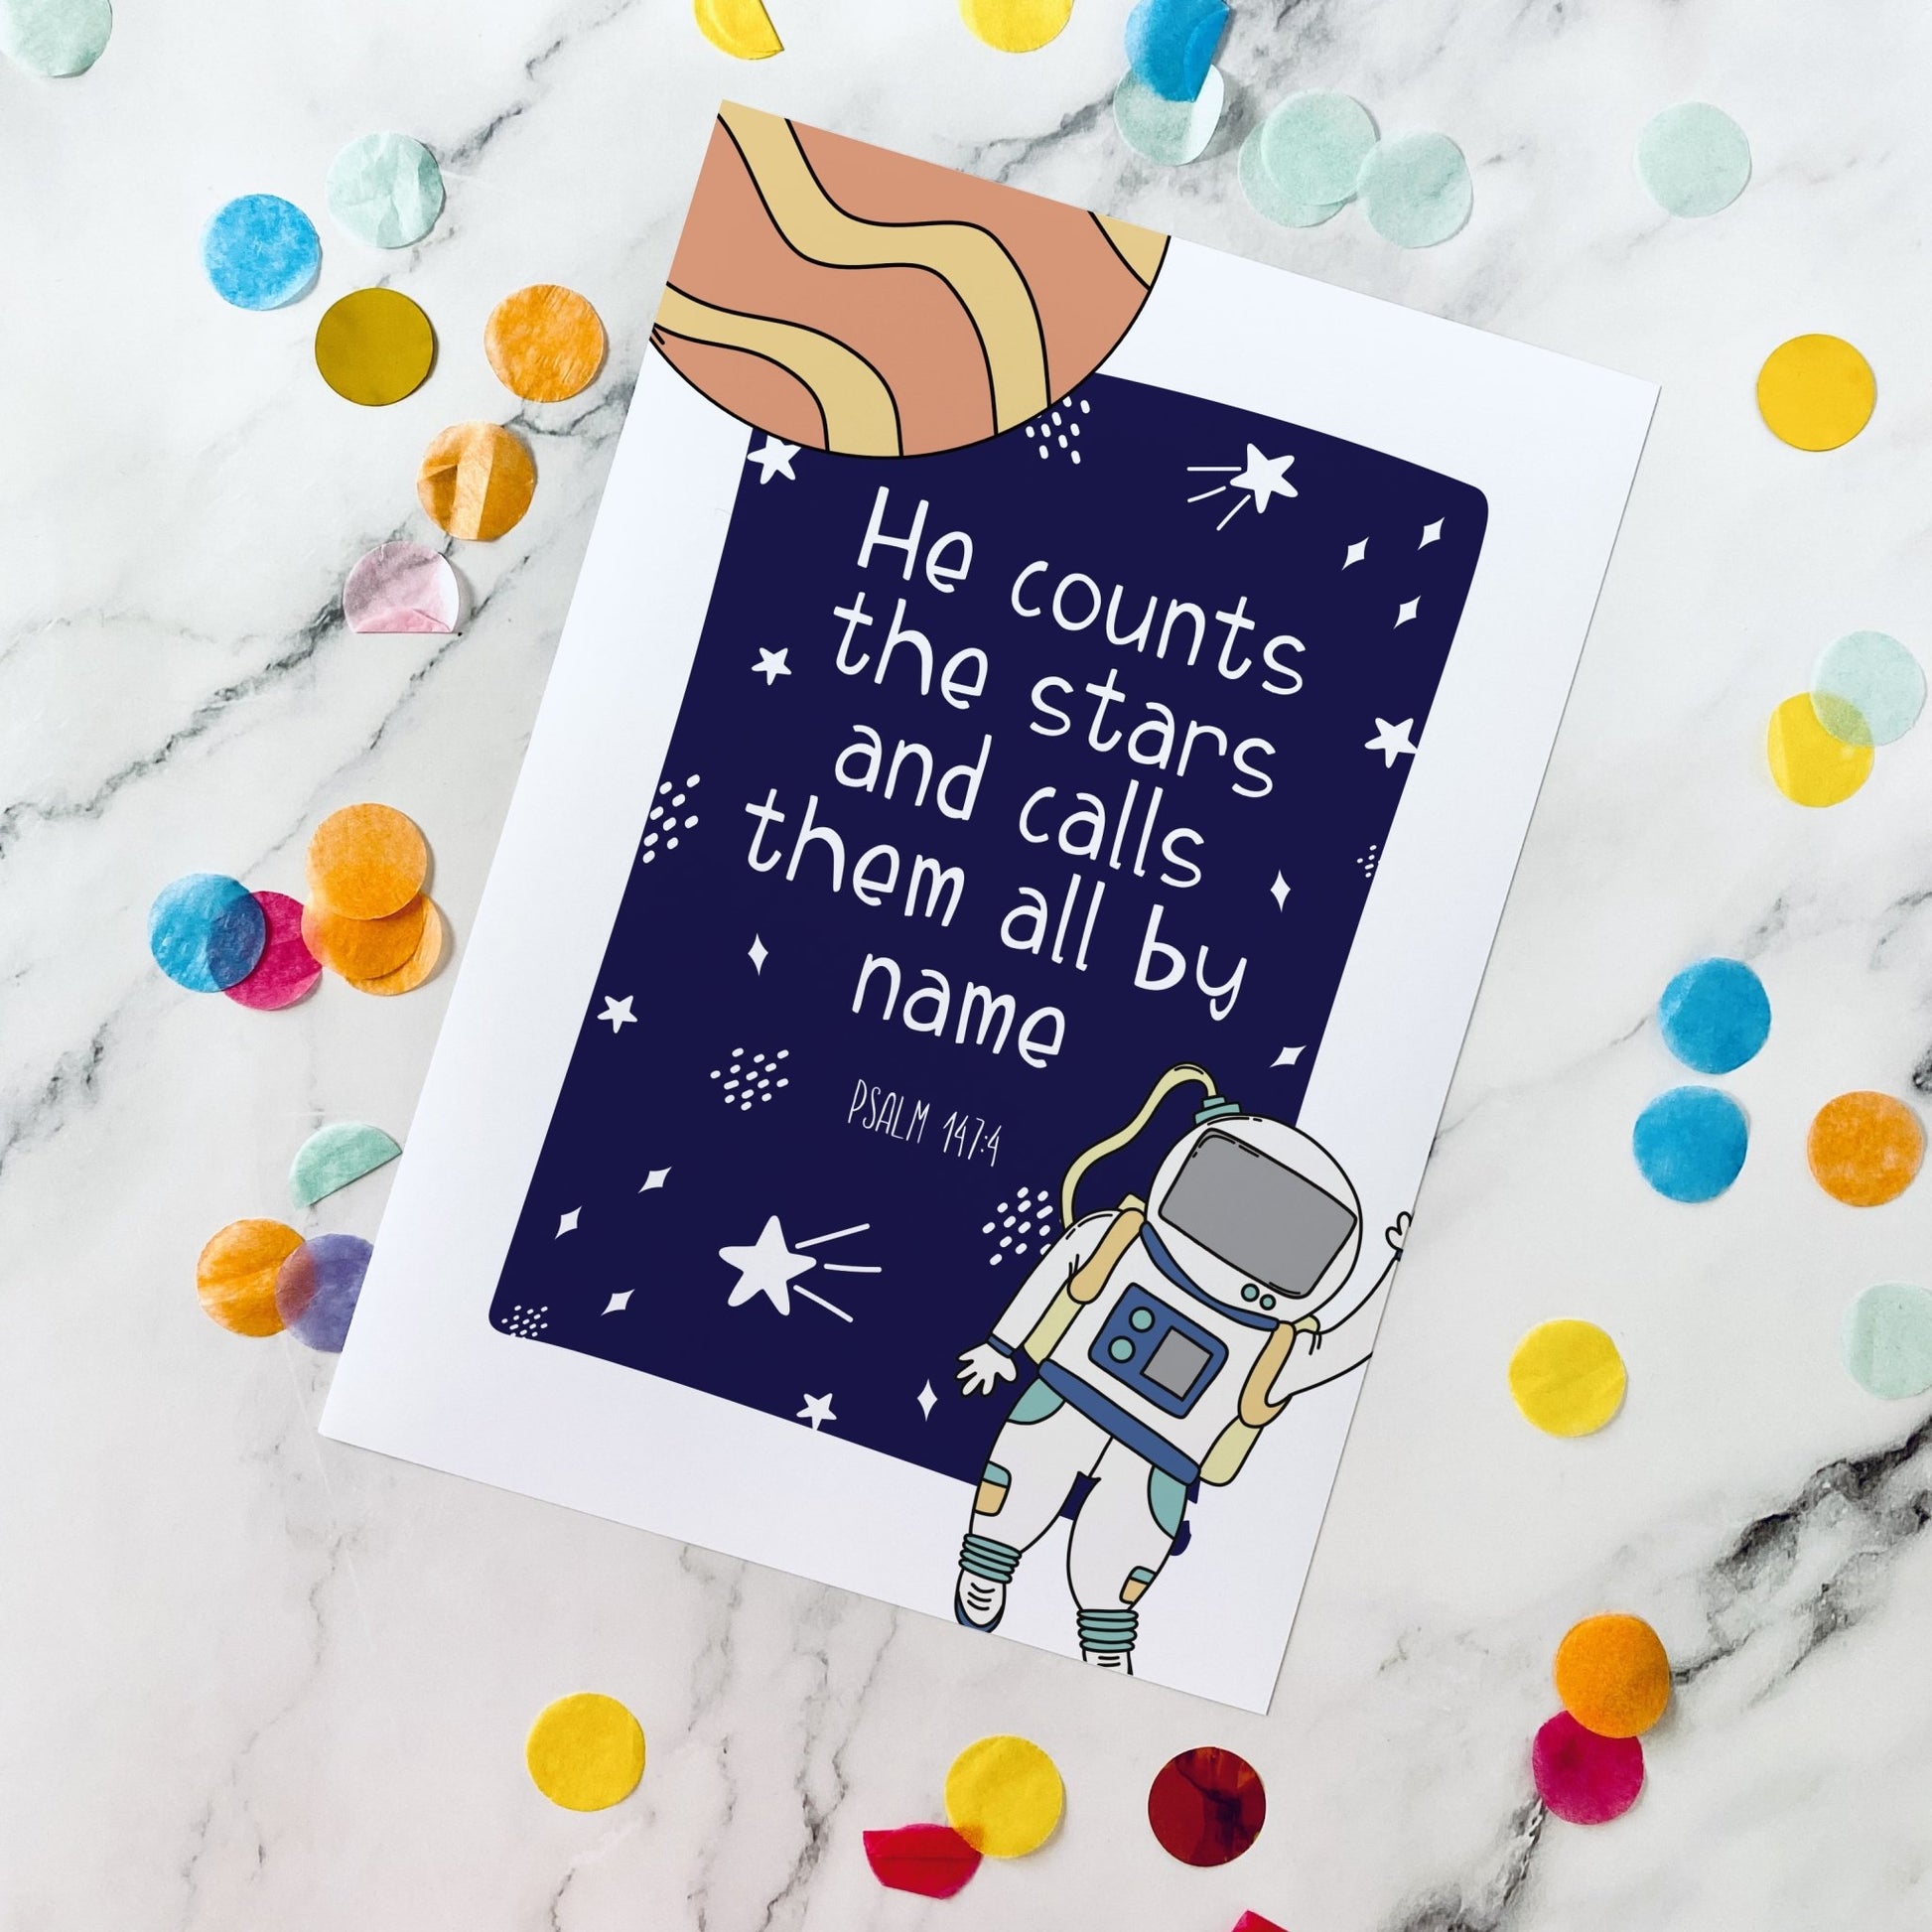 Space Bible Verse Prints, Set of 3 - Dolly and Fred Designs